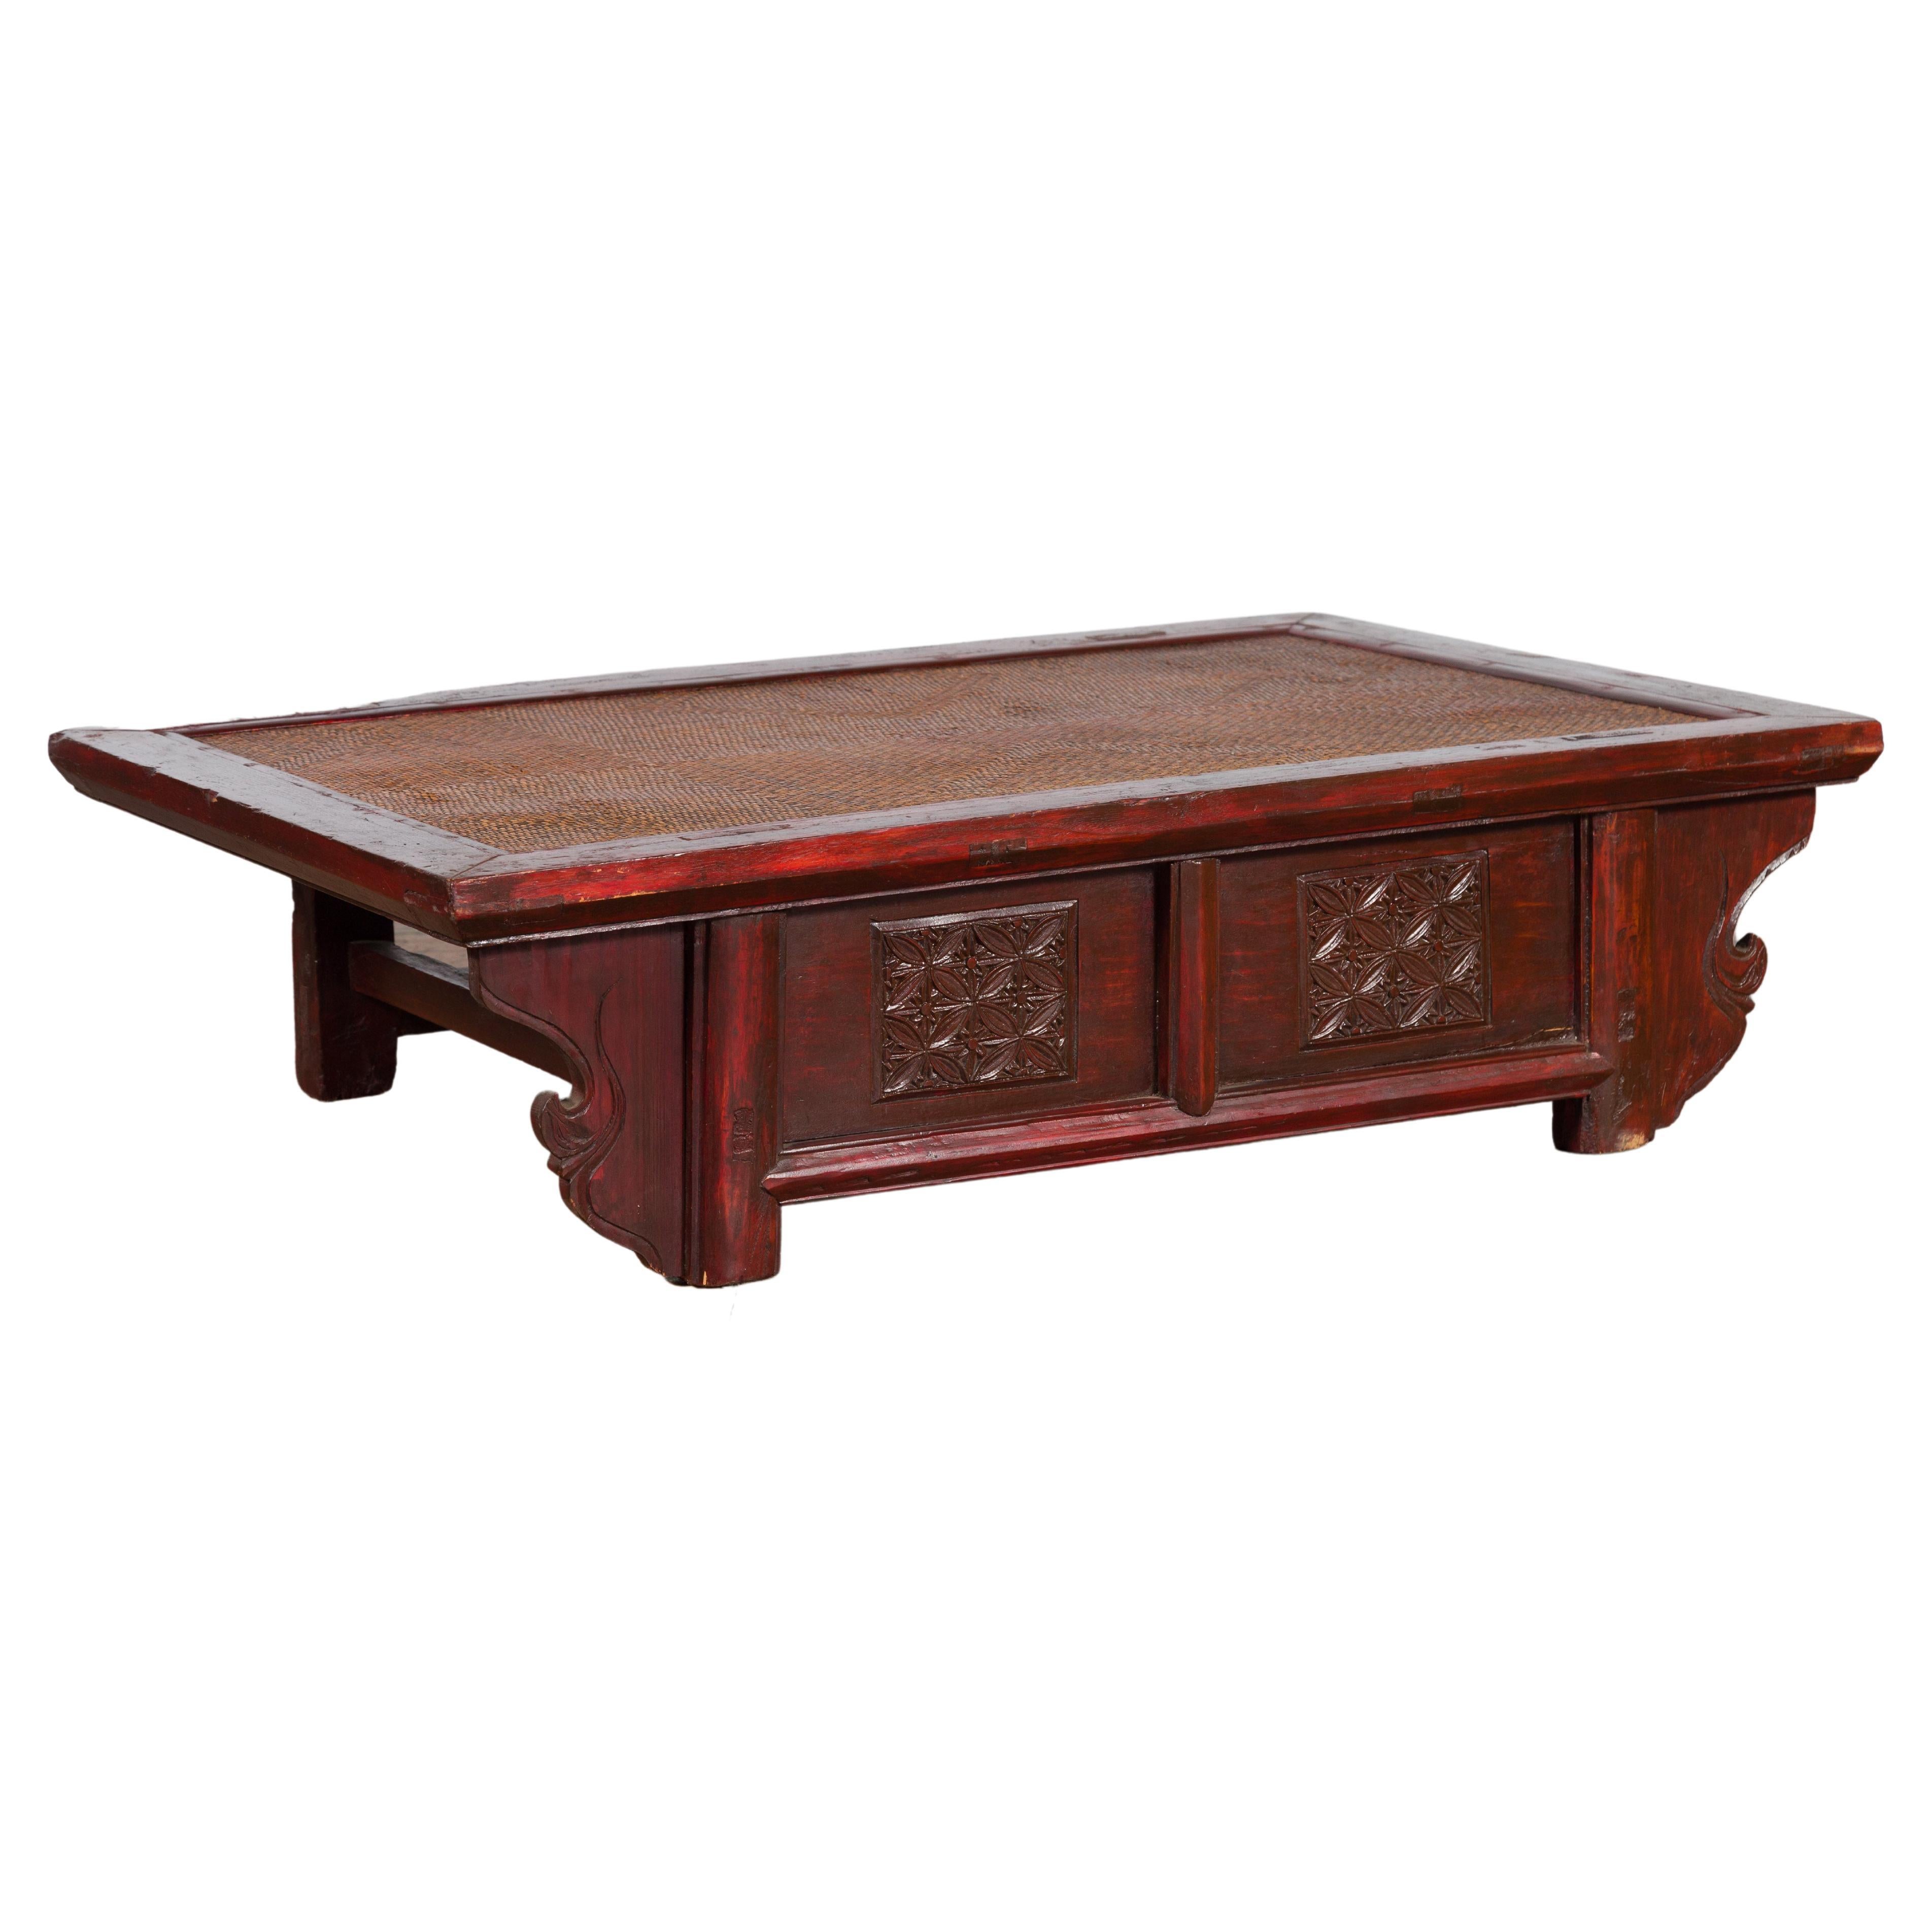 Chinese 19th Century Qing Dynasty Dark Red Lacquer Coffee Table with Rattan Top For Sale 10